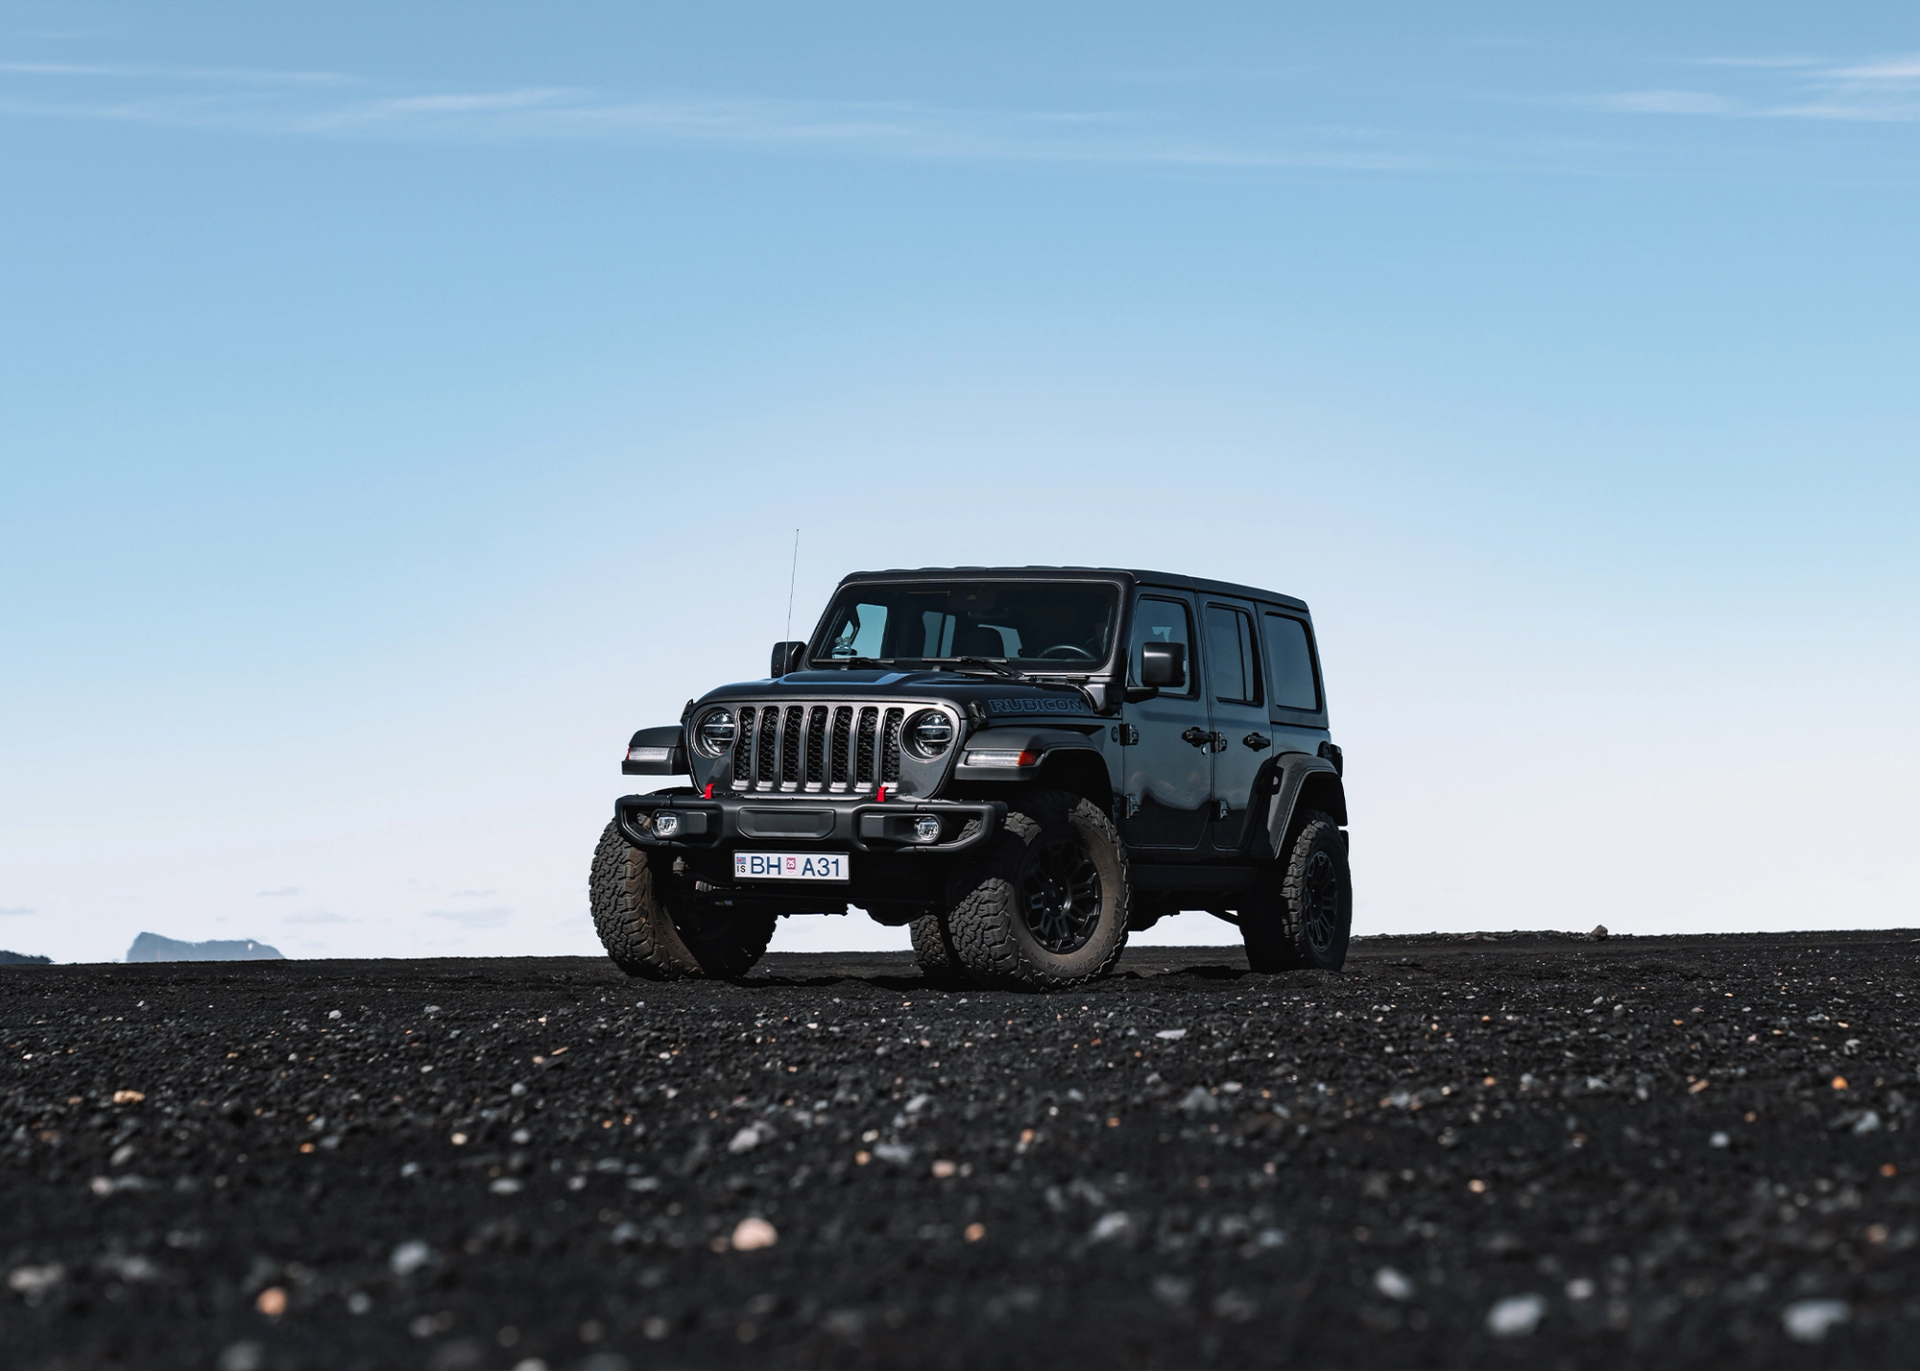 F-Road Luxury - A Jeep Wrangler Rubicon 4x4 SUV from Go Car Rental exploring the untamed beauty of Iceland.